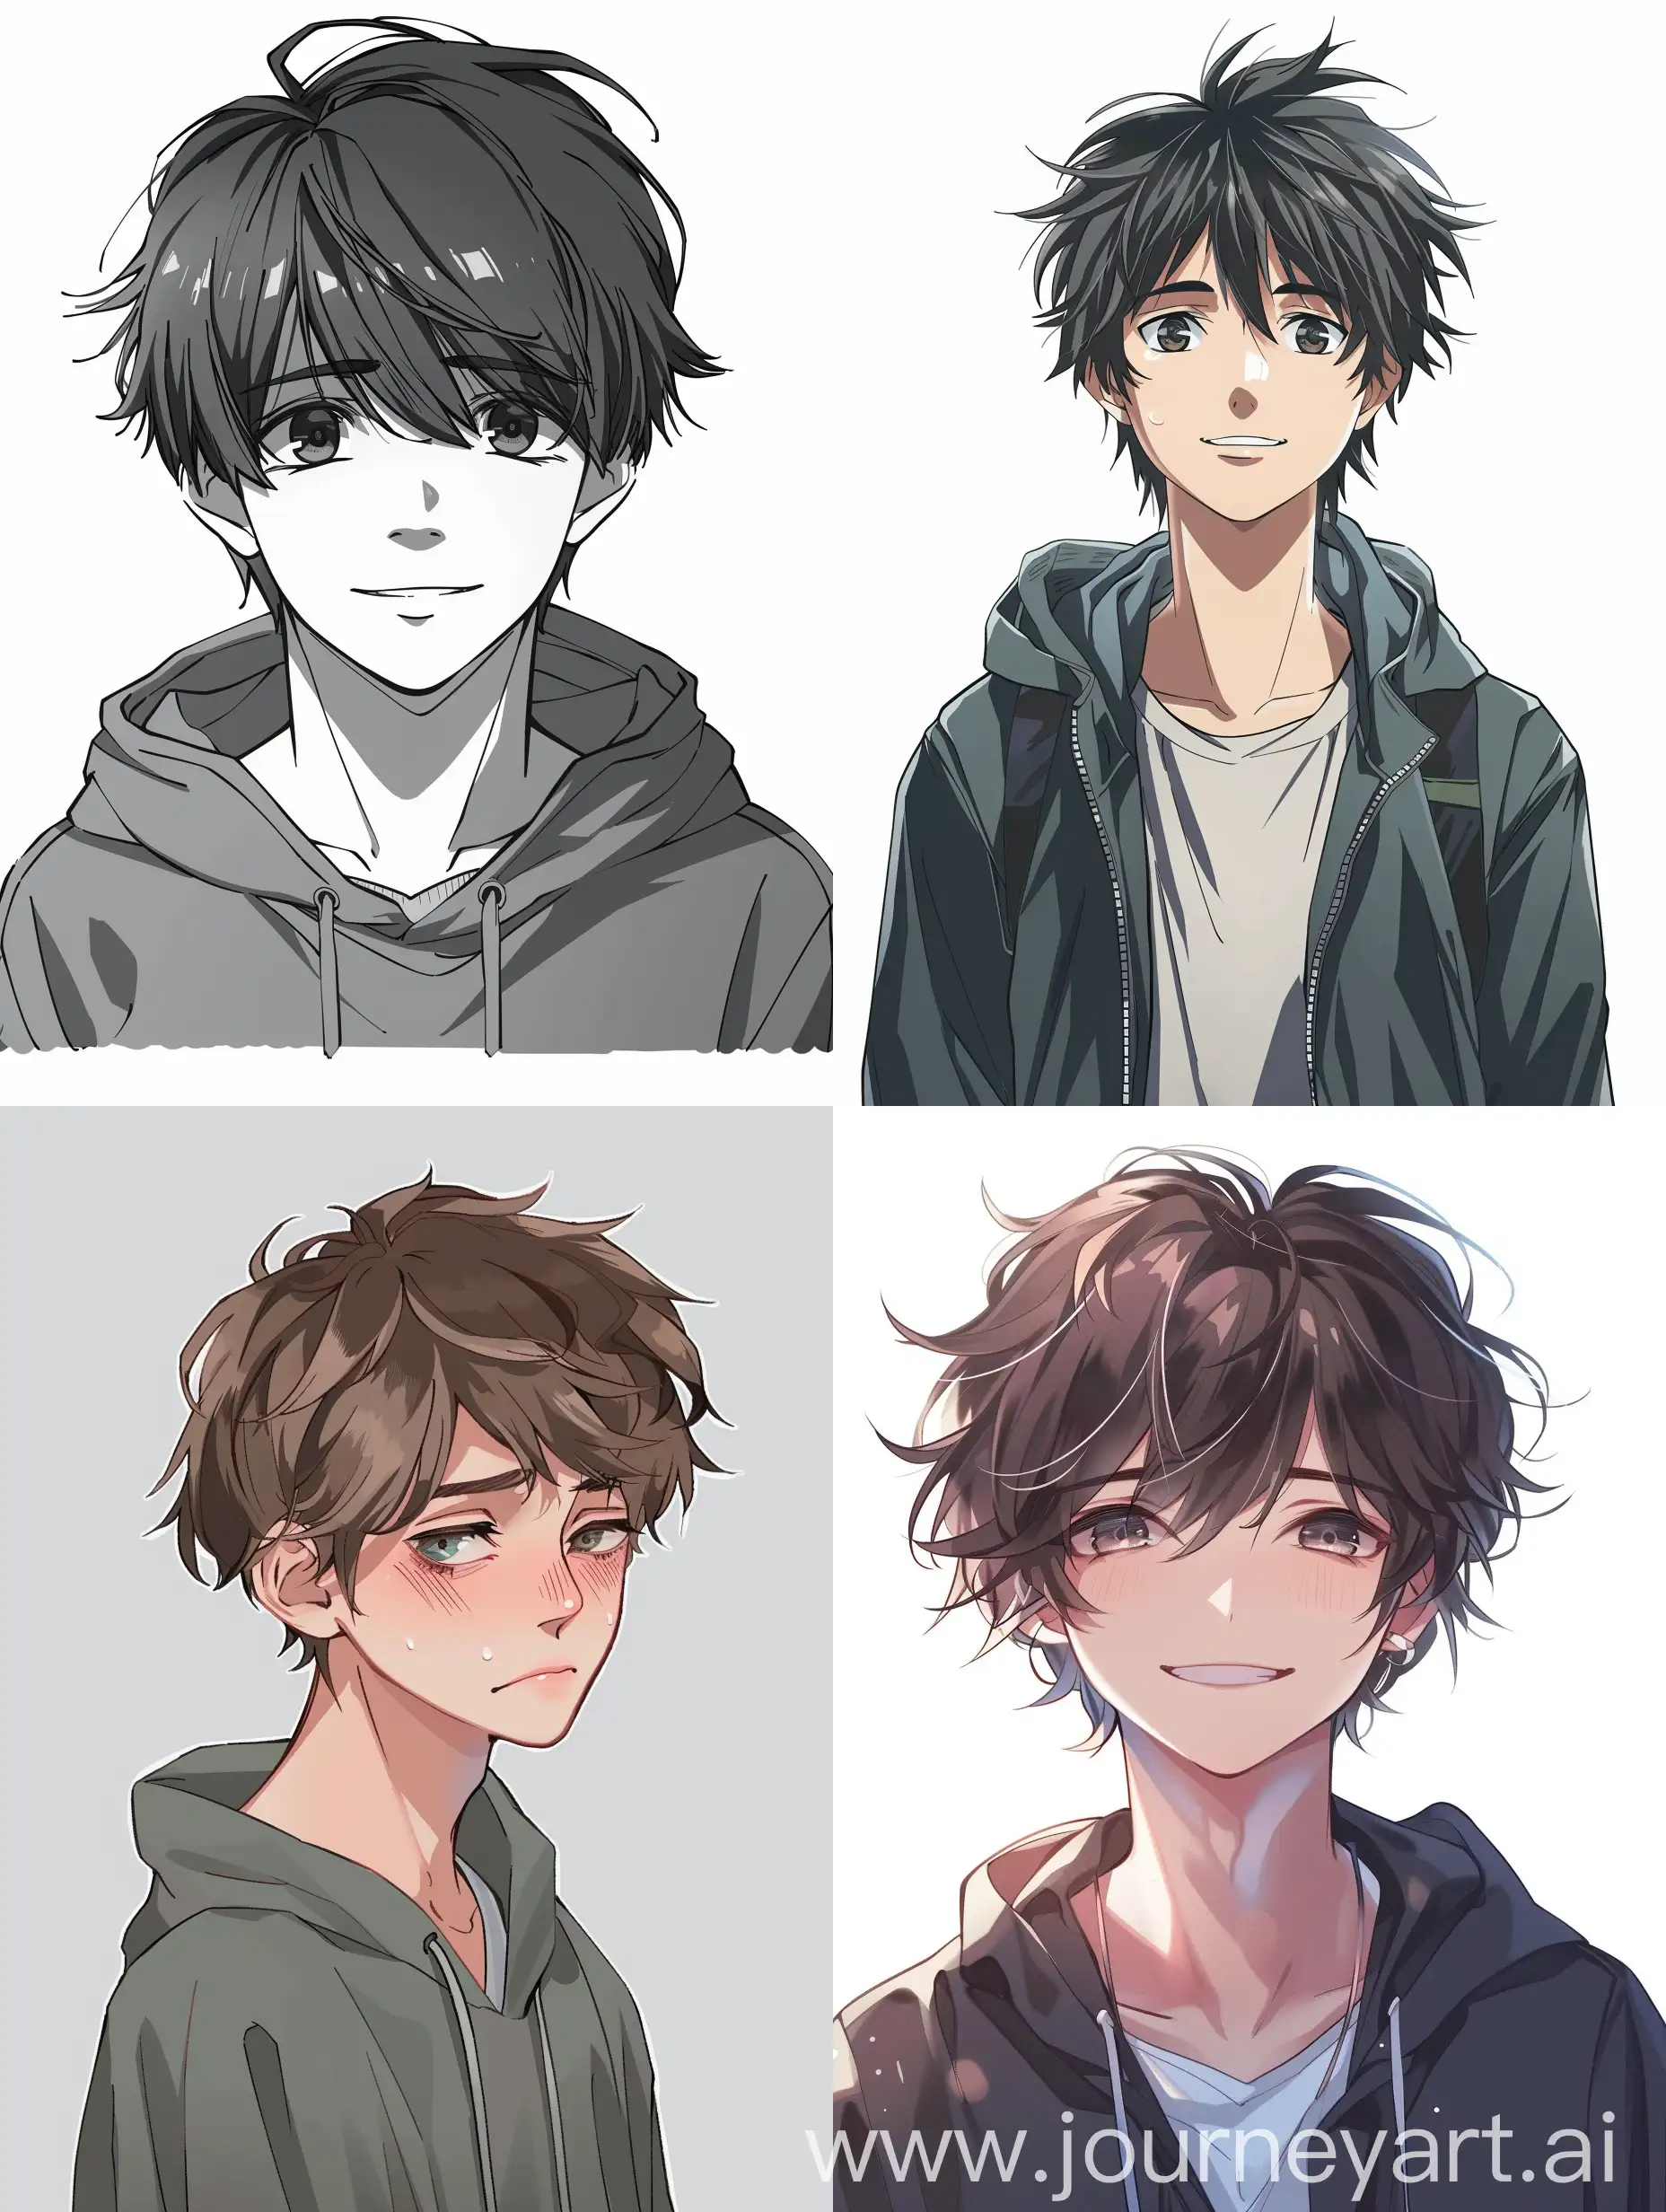 Resilient-Anime-Teen-Boy-with-Mixed-Emotions